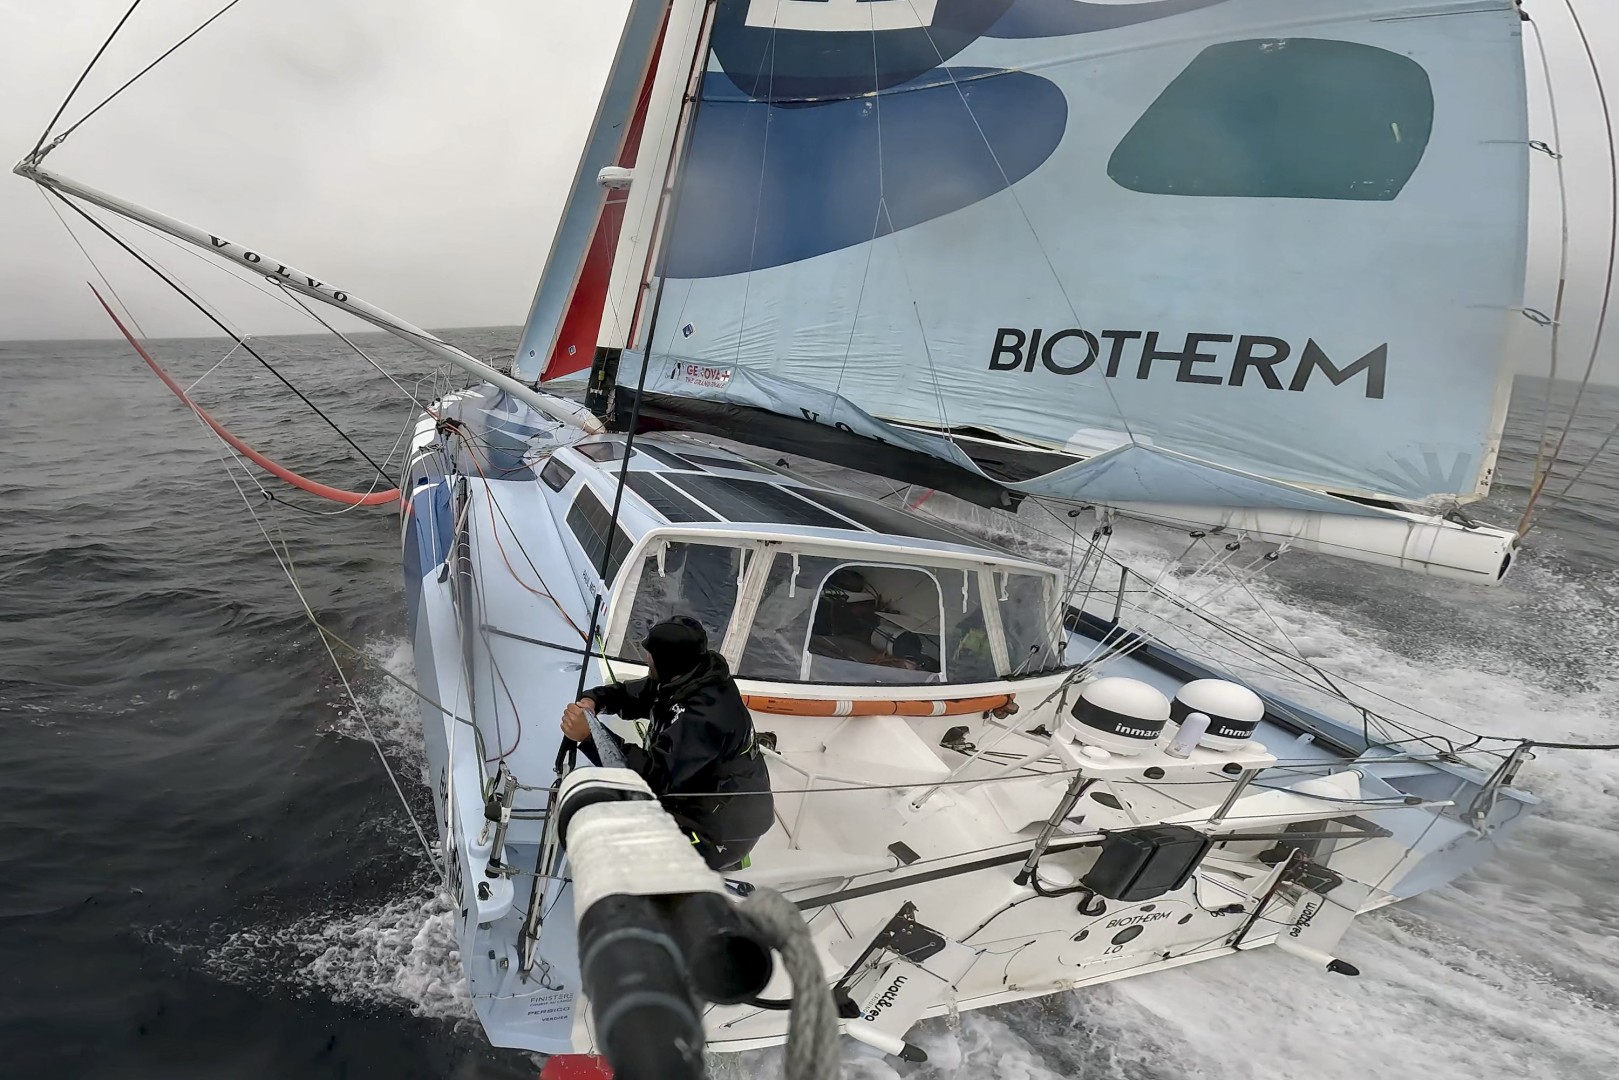 The Ocean Race 2022-23 - 25 May 2023, Leg 5 Day 4 onboard Biotherm. OBR Ronan Gladu getting a polecam view from the back of the boat.
© Ronan Gladu / Biotherm / The Ocean Race